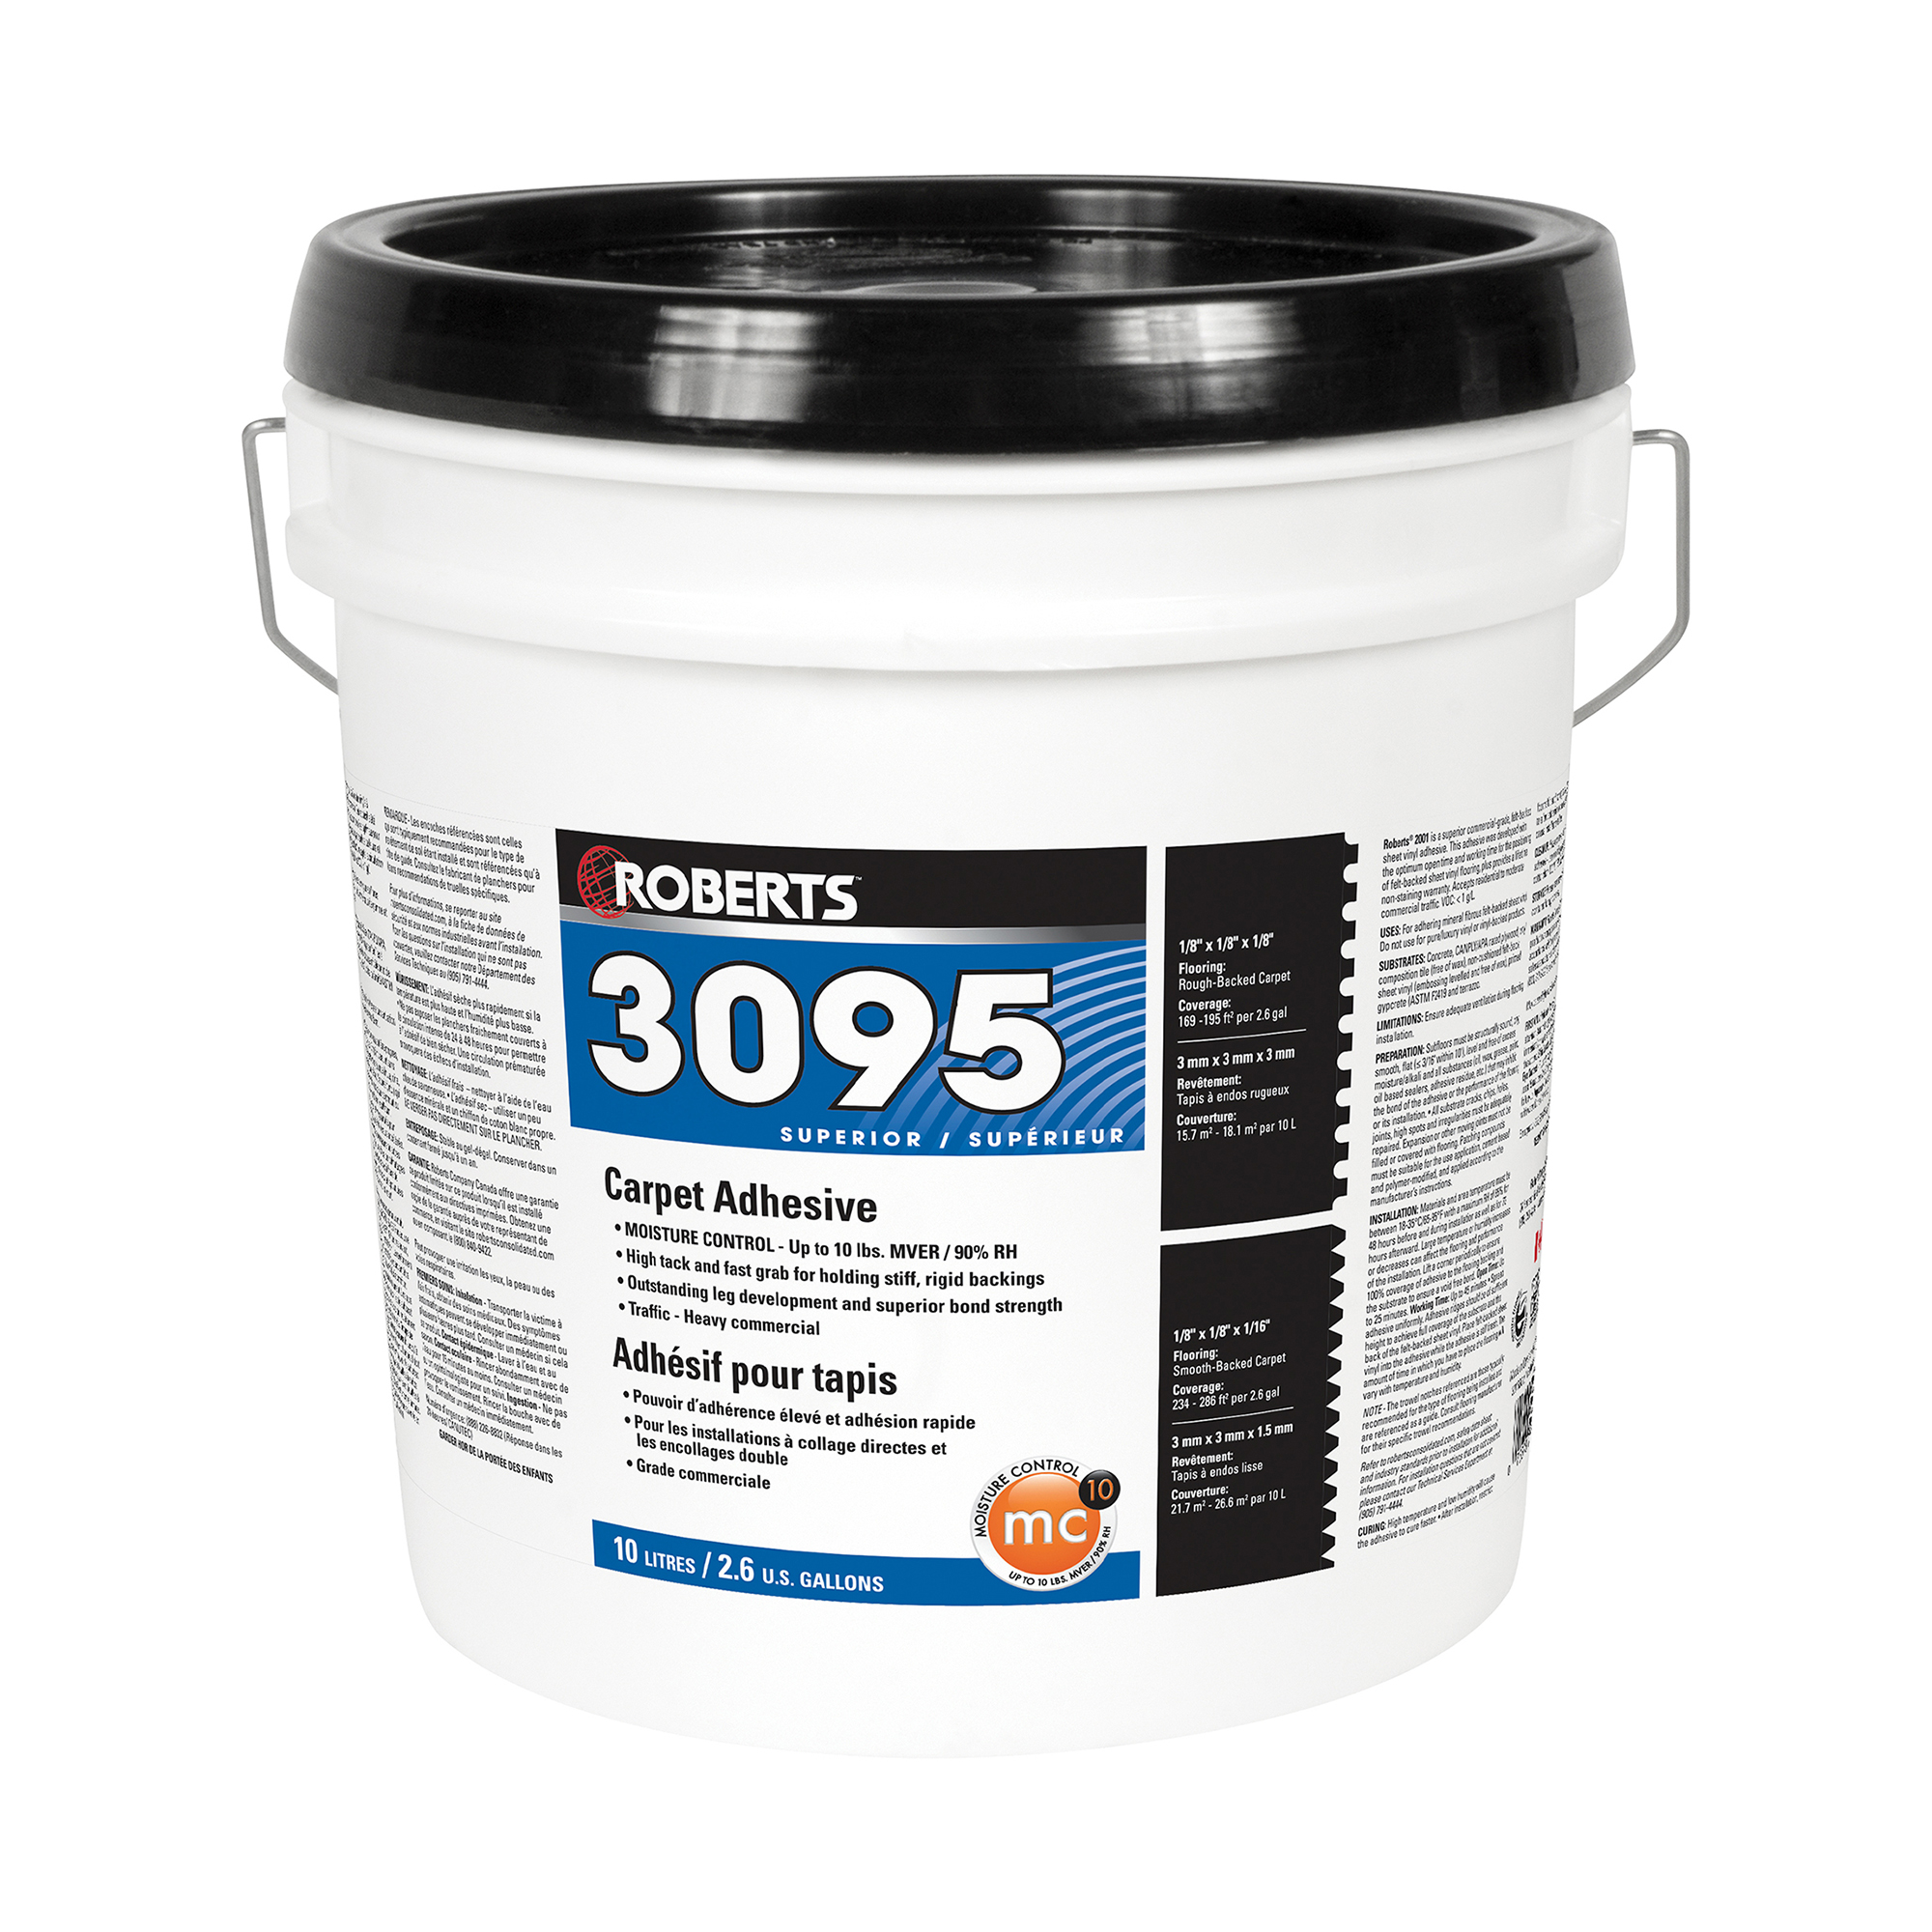 https://www.robertsconsolidated.com/ca/wp-content/uploads/2023/04/ROBERTS_3095-Carpet-Adhesive_3095RB010_Product-Image.jpg